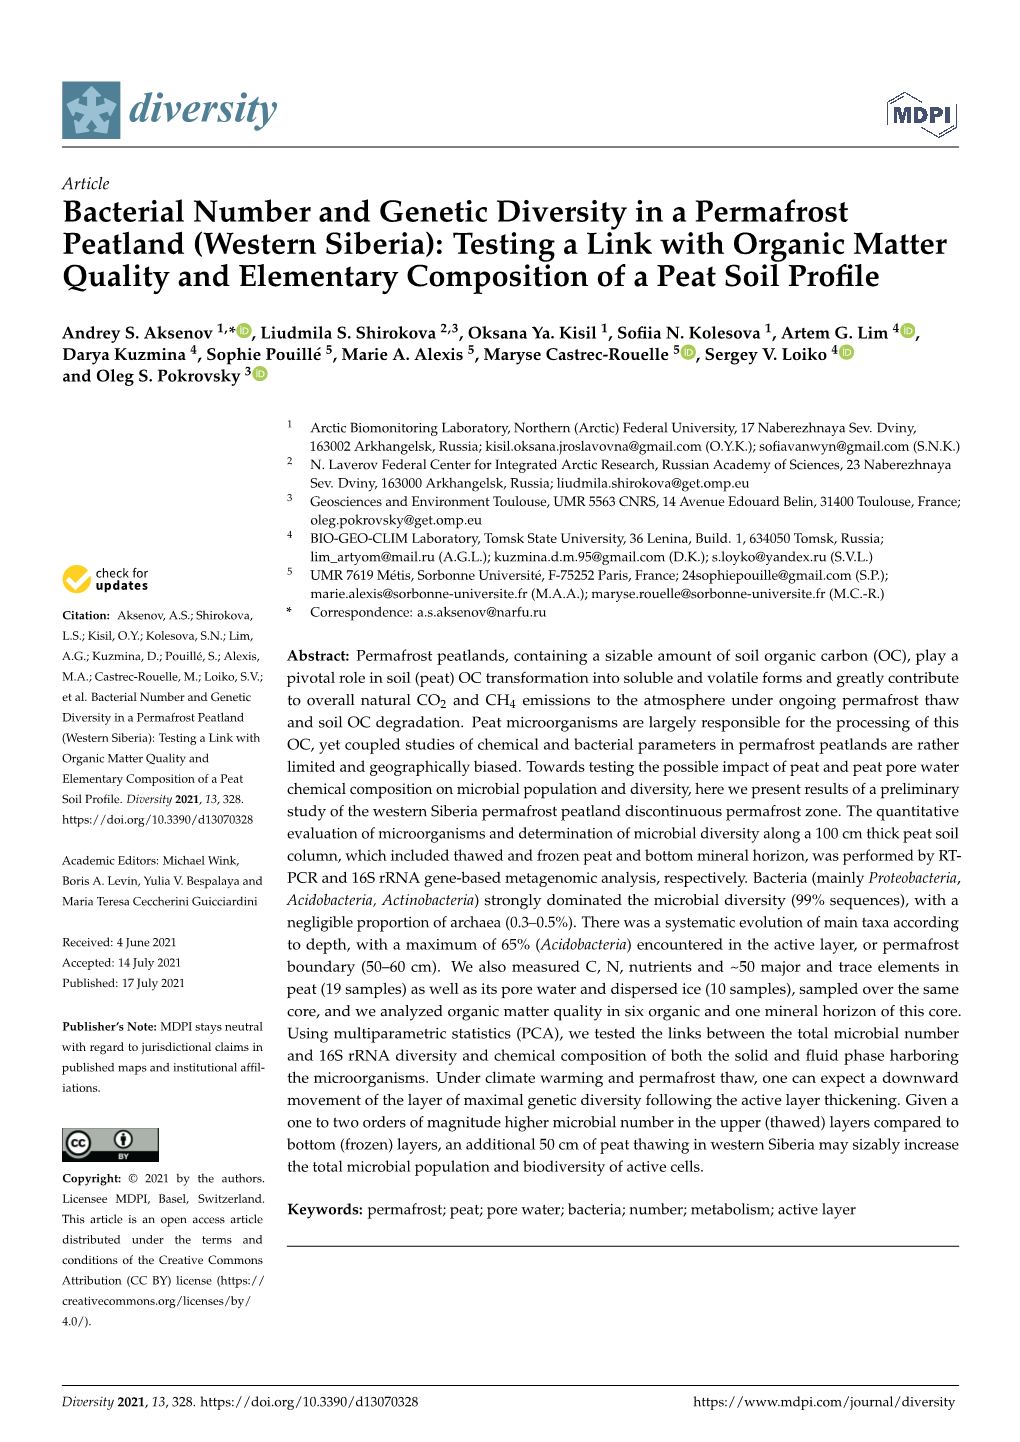 Bacterial Number and Genetic Diversity in a Permafrost Peatland (Western Siberia): Testing a Link with Organic Matter Quality An